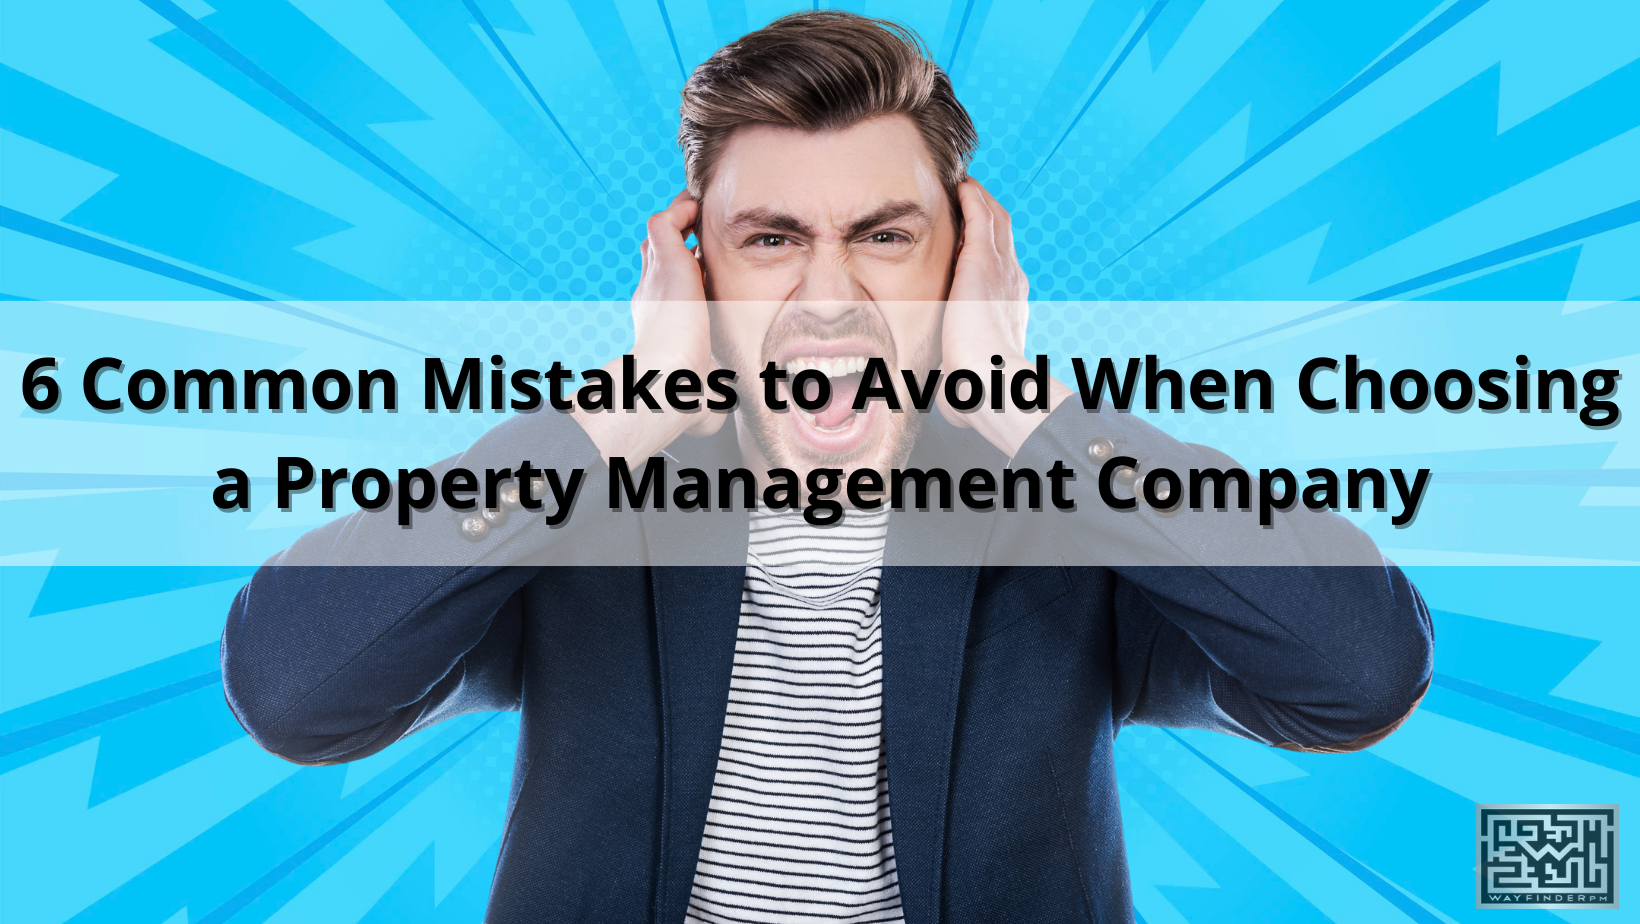 6 Common Mistakes to Avoid When Choosing a Property Management Company